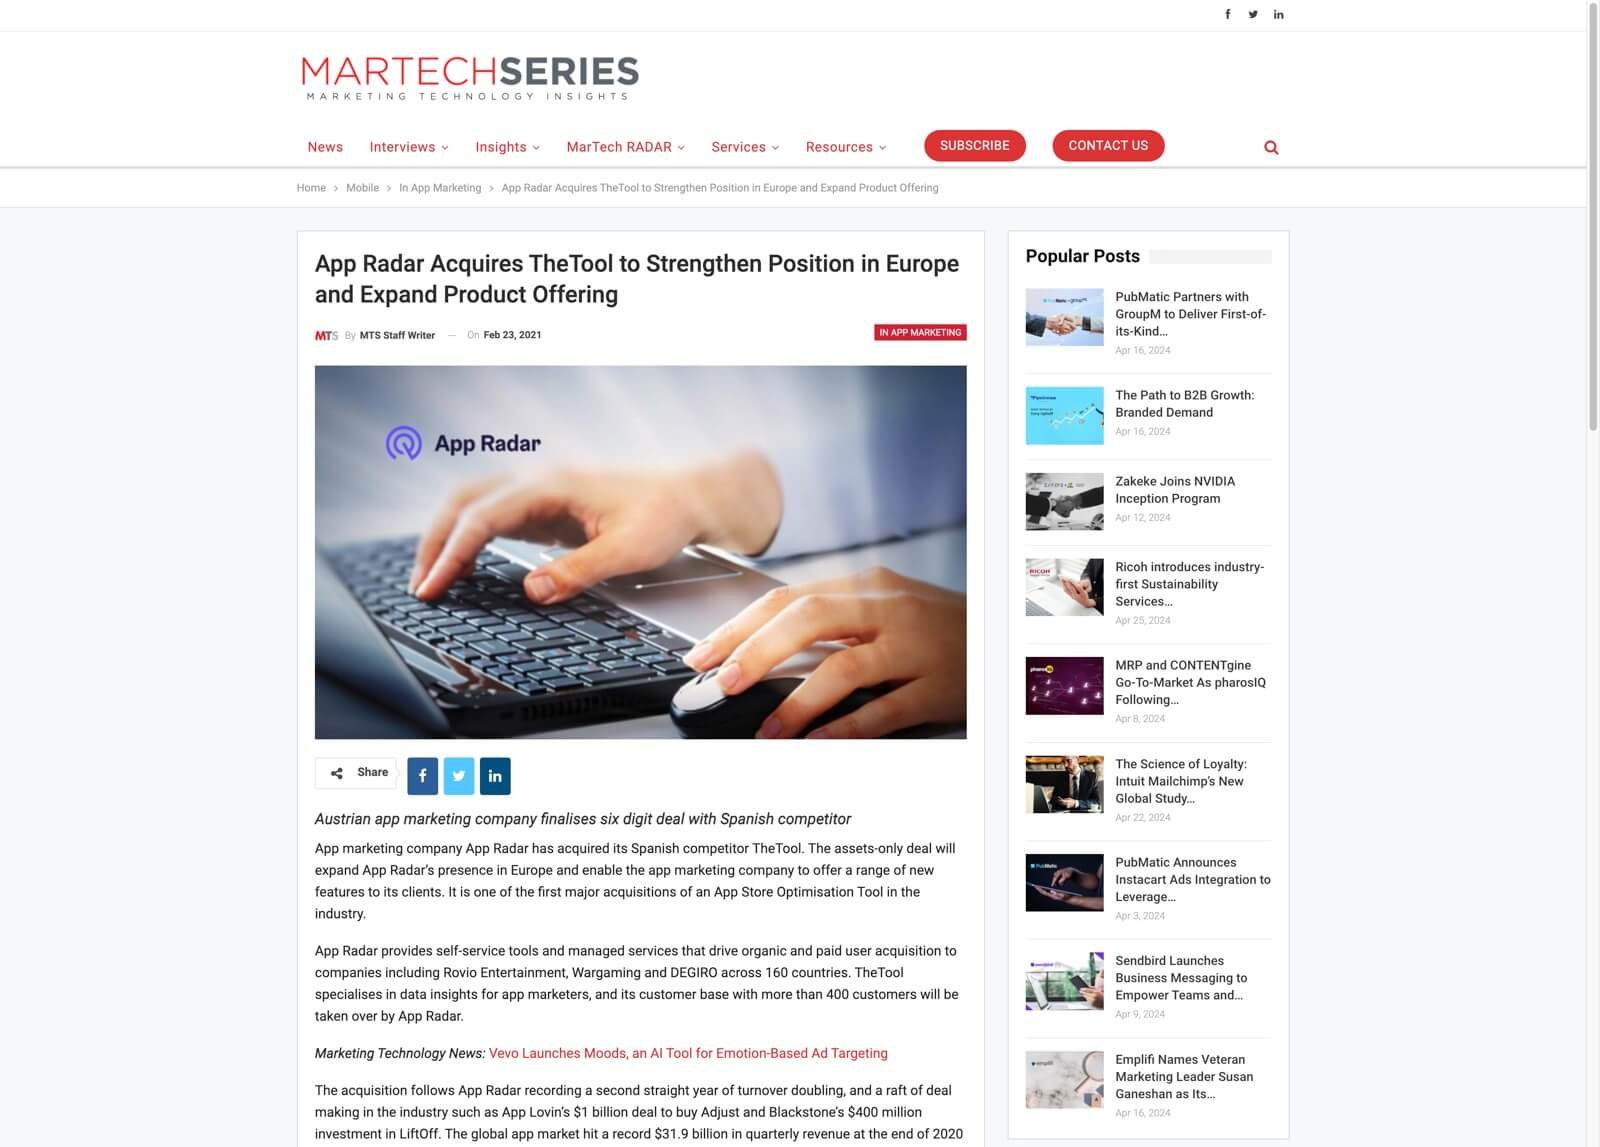 Martech-Series-App-Radar-Acquires-TheTool-to-Strengthen-Position-in-Europe-and-Expand-Product-Offering.jpg